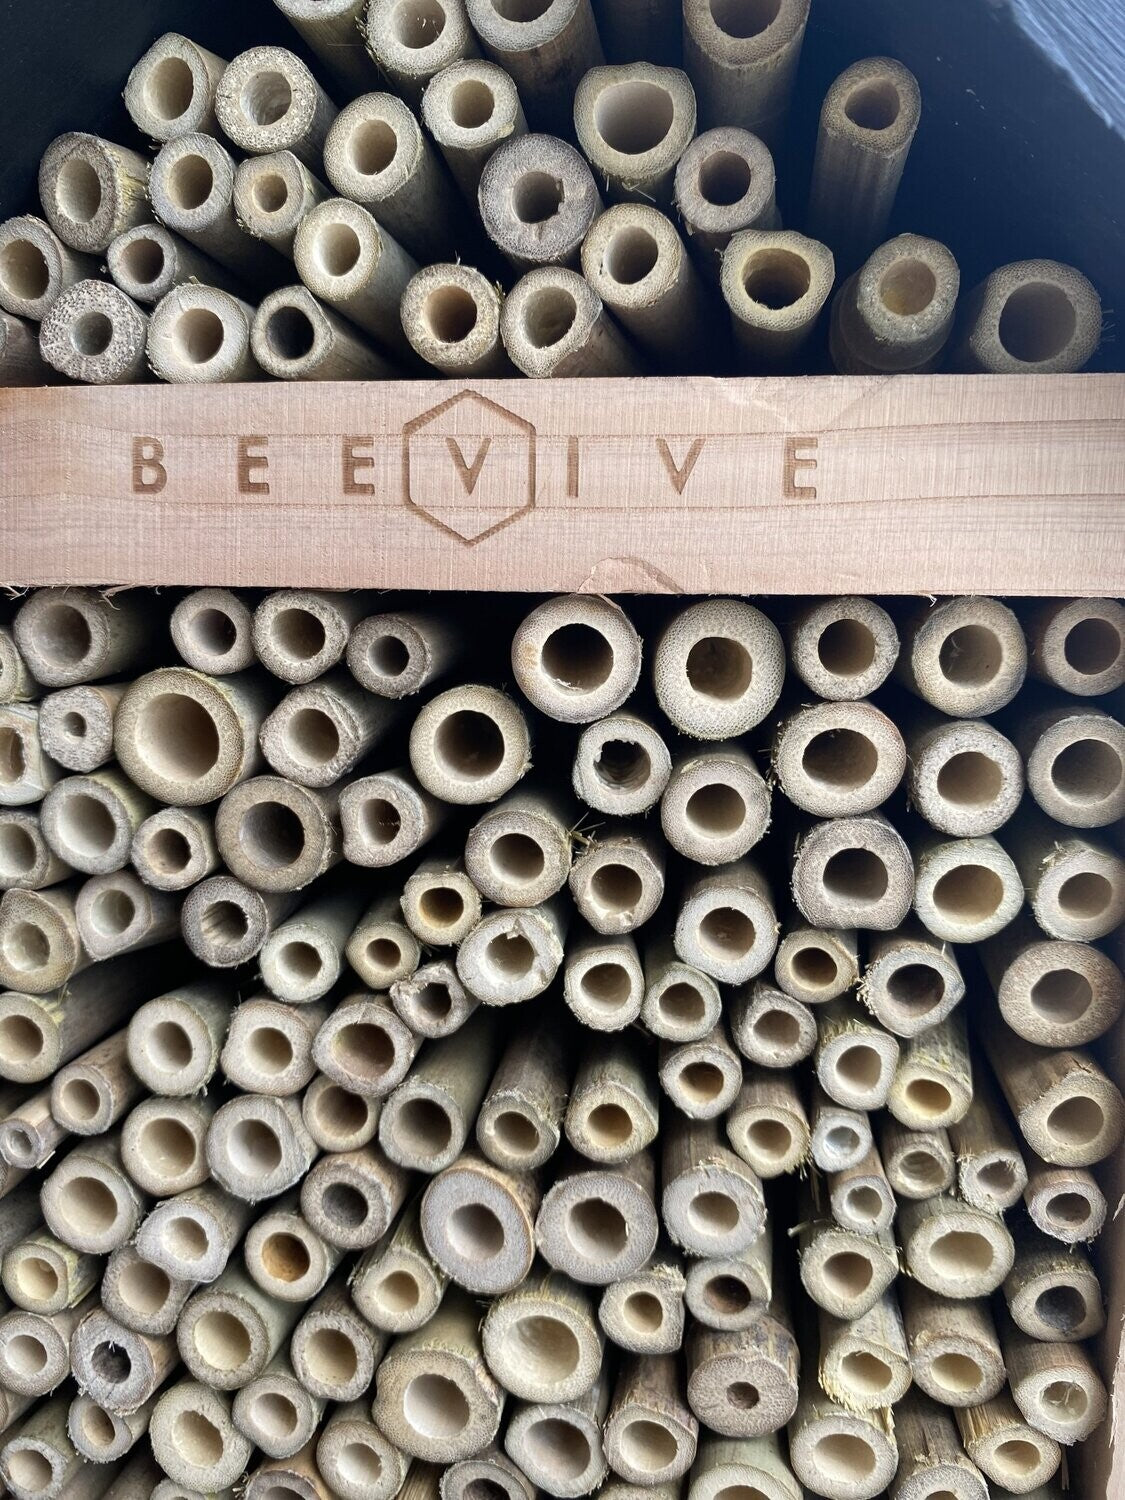 front of non perfect bee hotel 2.0 showing beevive.com logo stamped out of place